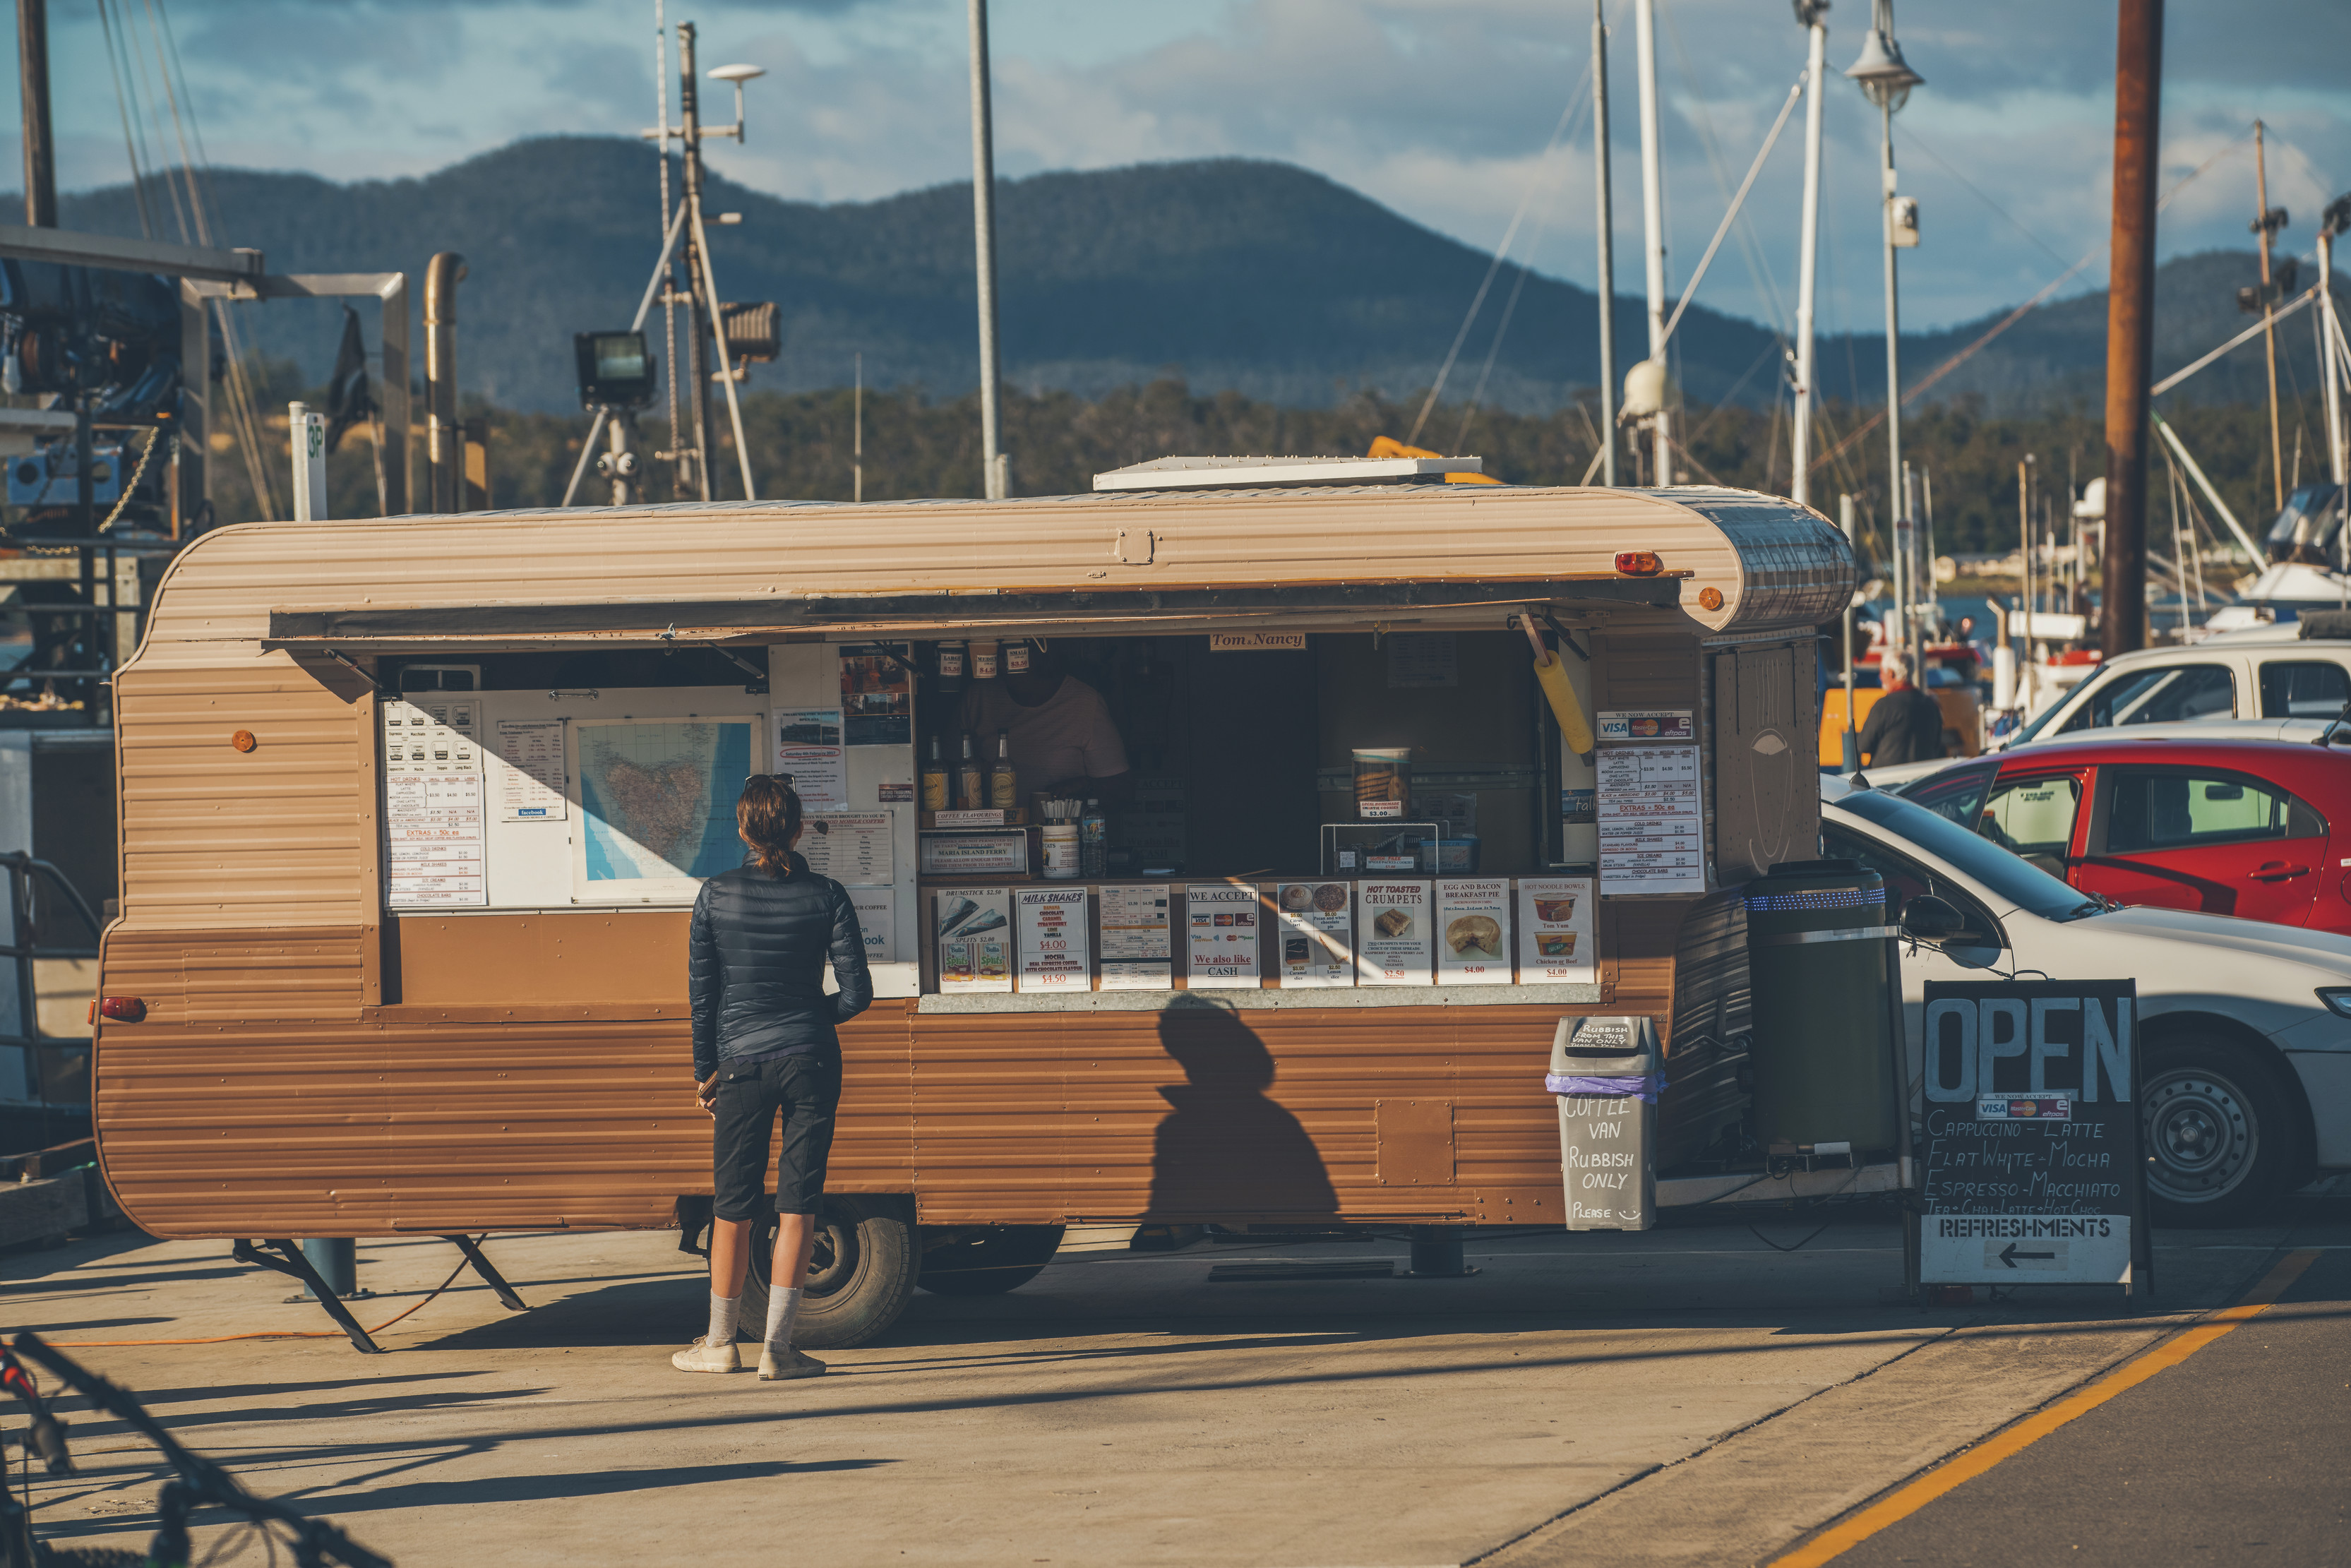 A woman purchases a coffee from the Coffee van, Triabunna. Boats are in the background.